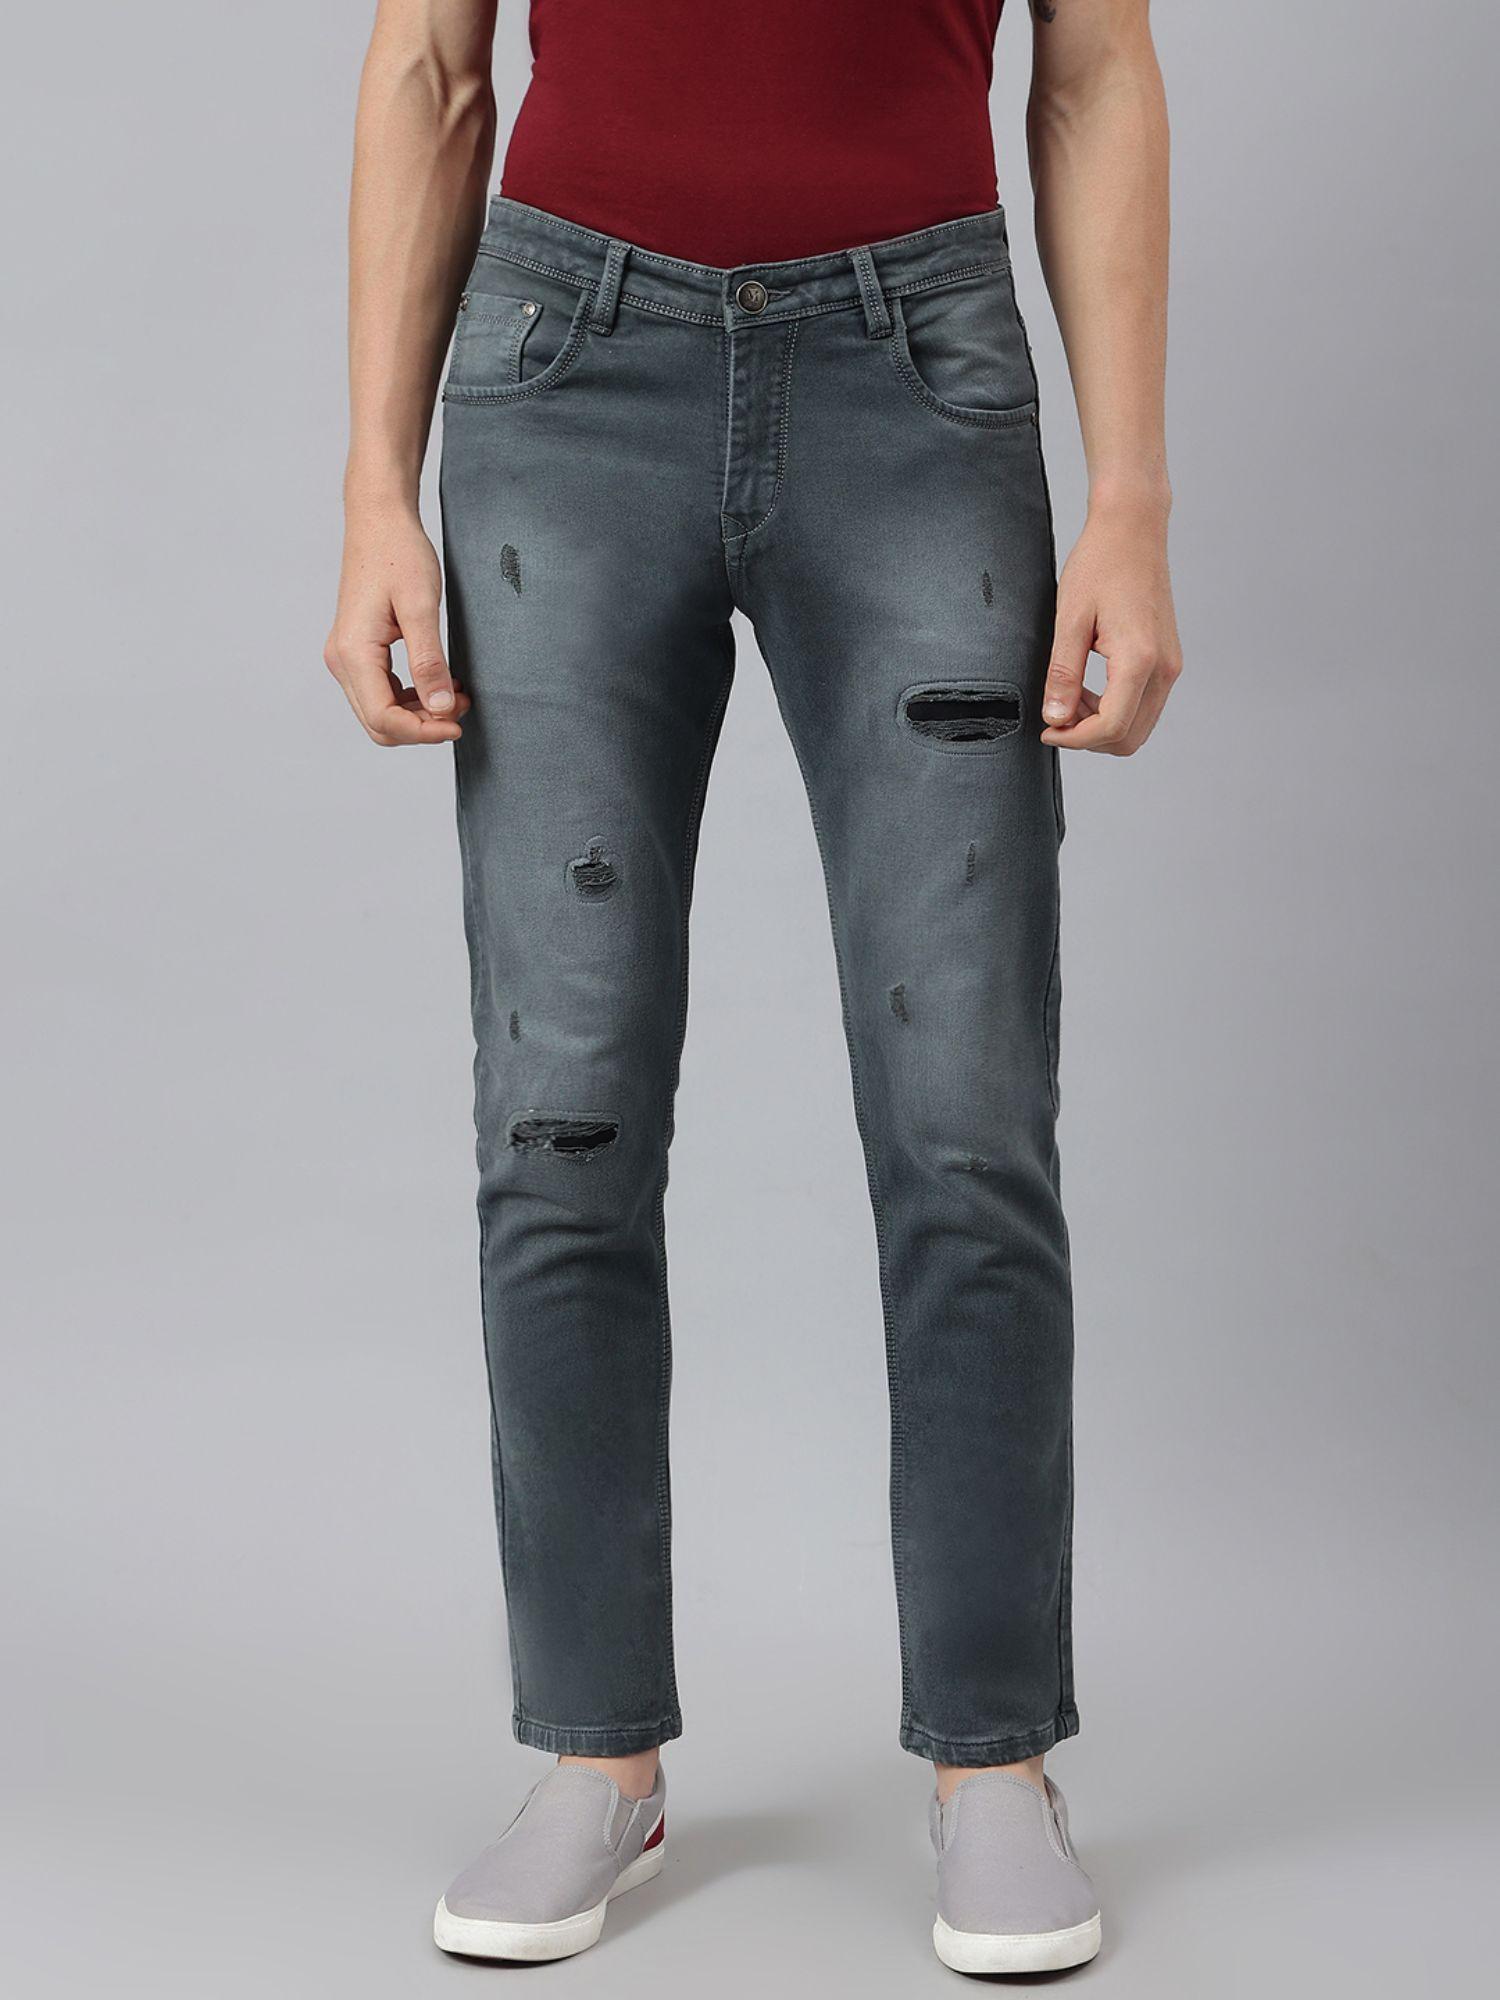 grey cotton solid jeans